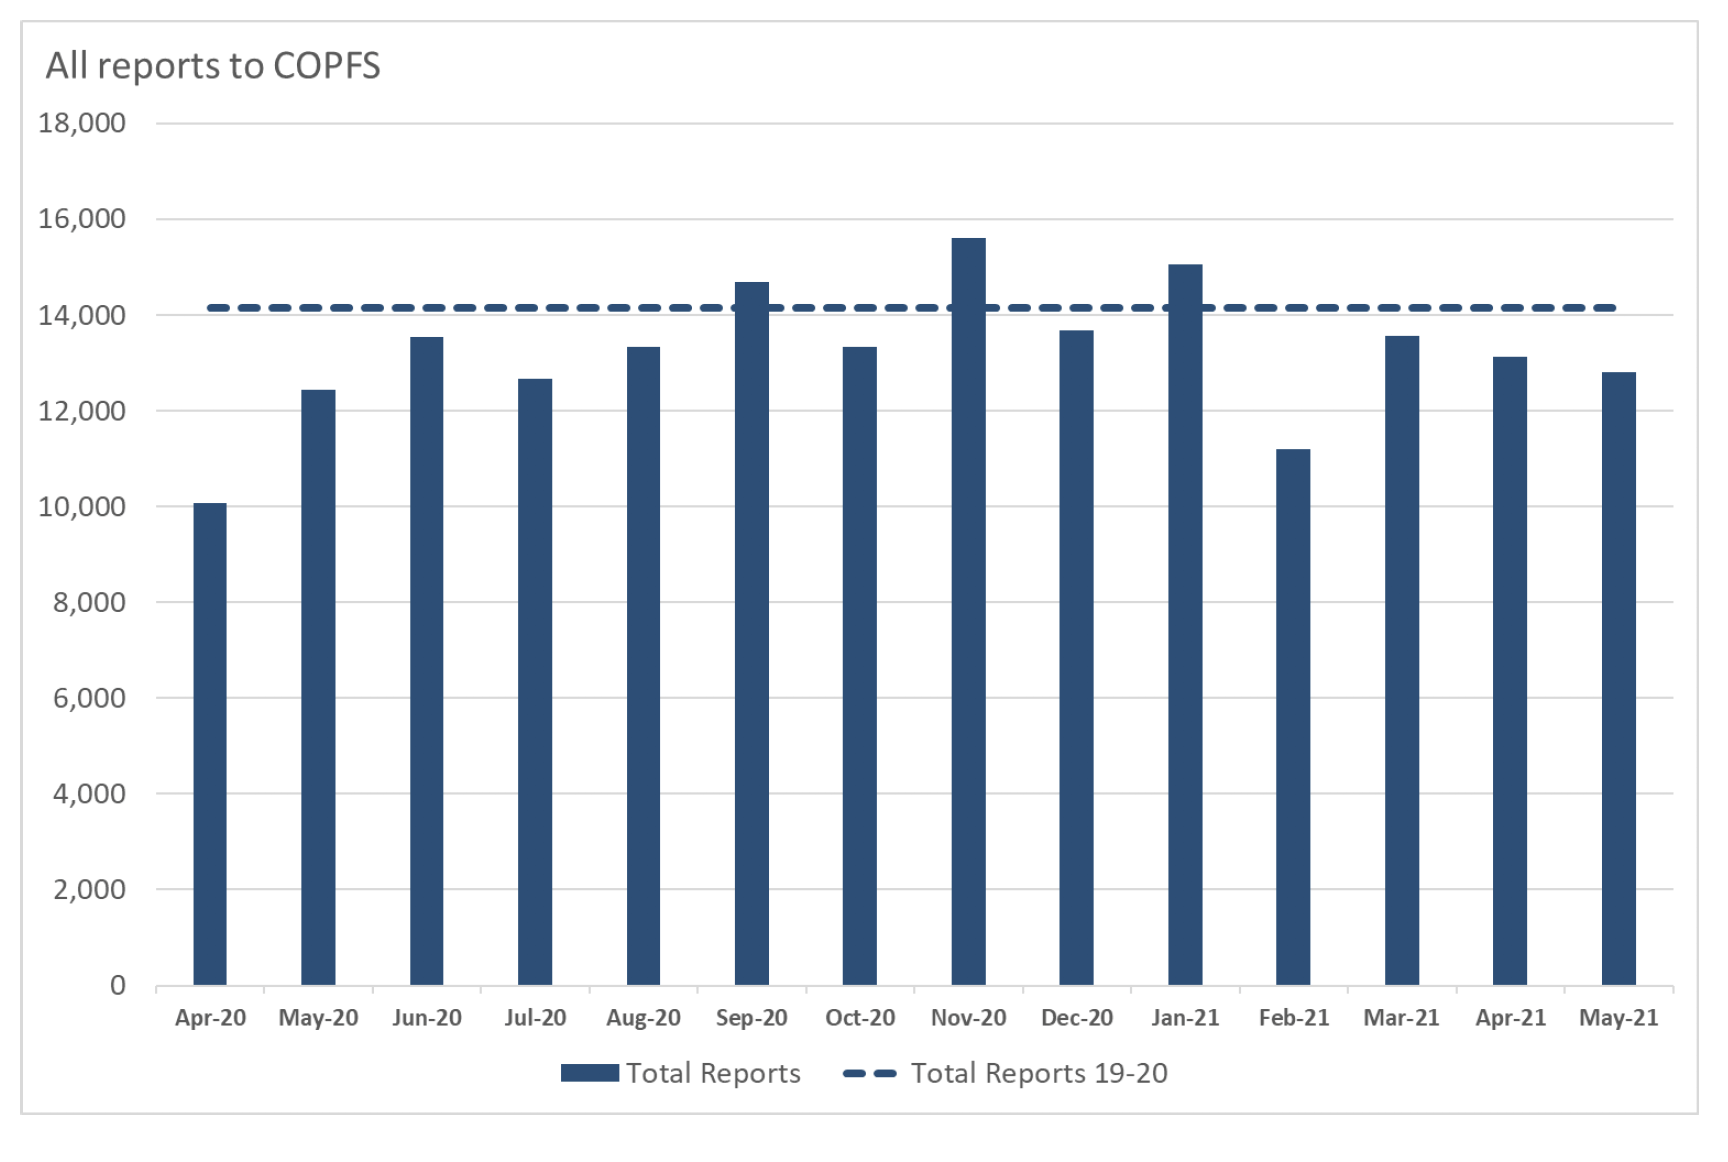 Bar chart showing the total number of reports received by COPFS